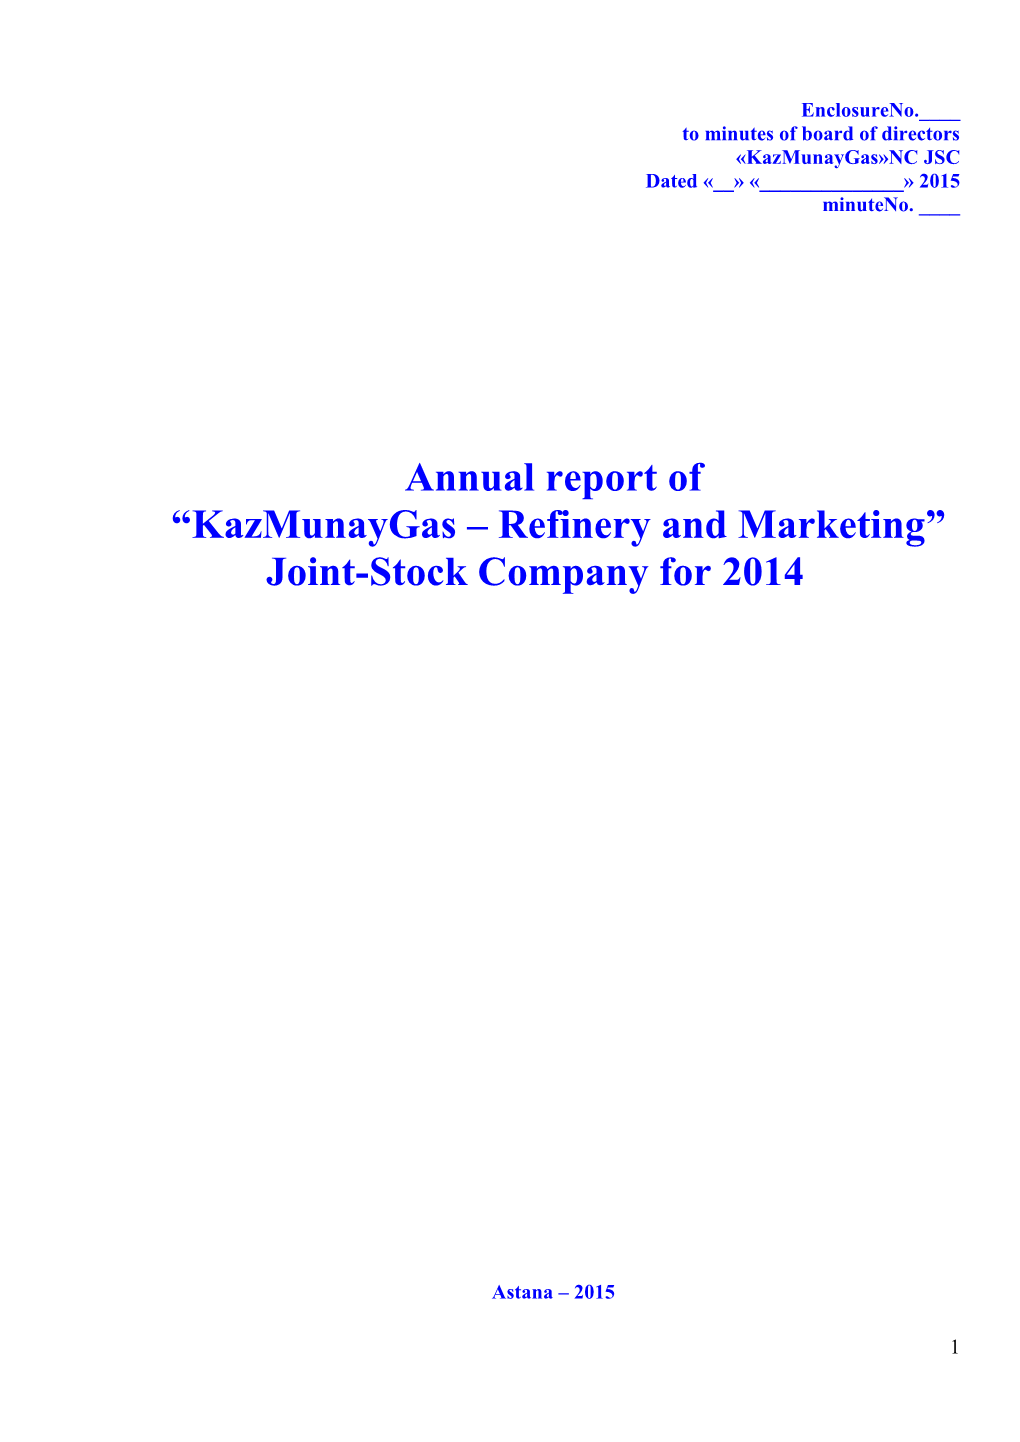 Annual Report of “Kazmunaygas – Refinery and Marketing” Joint-Stock Company for 2014